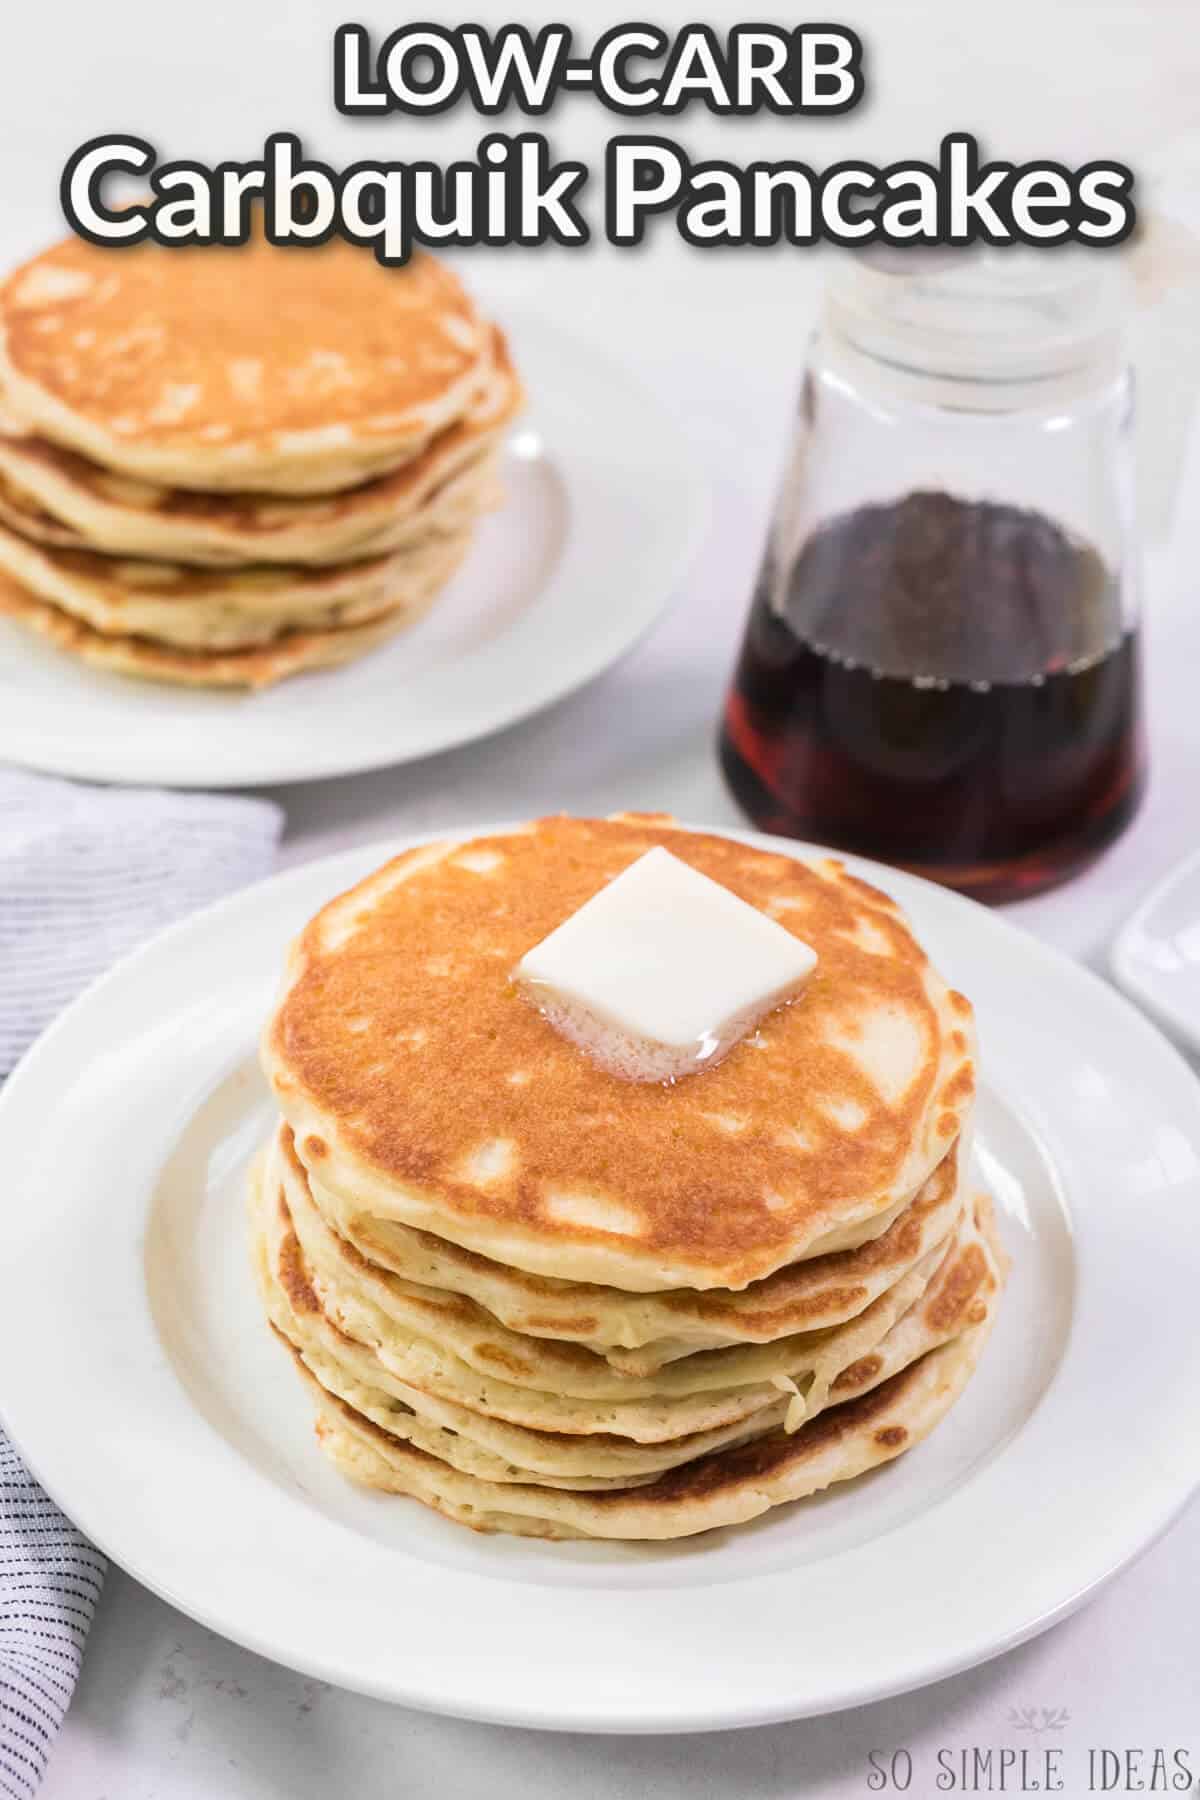 low-carb carbquik pancakes on white plates with syrup in container